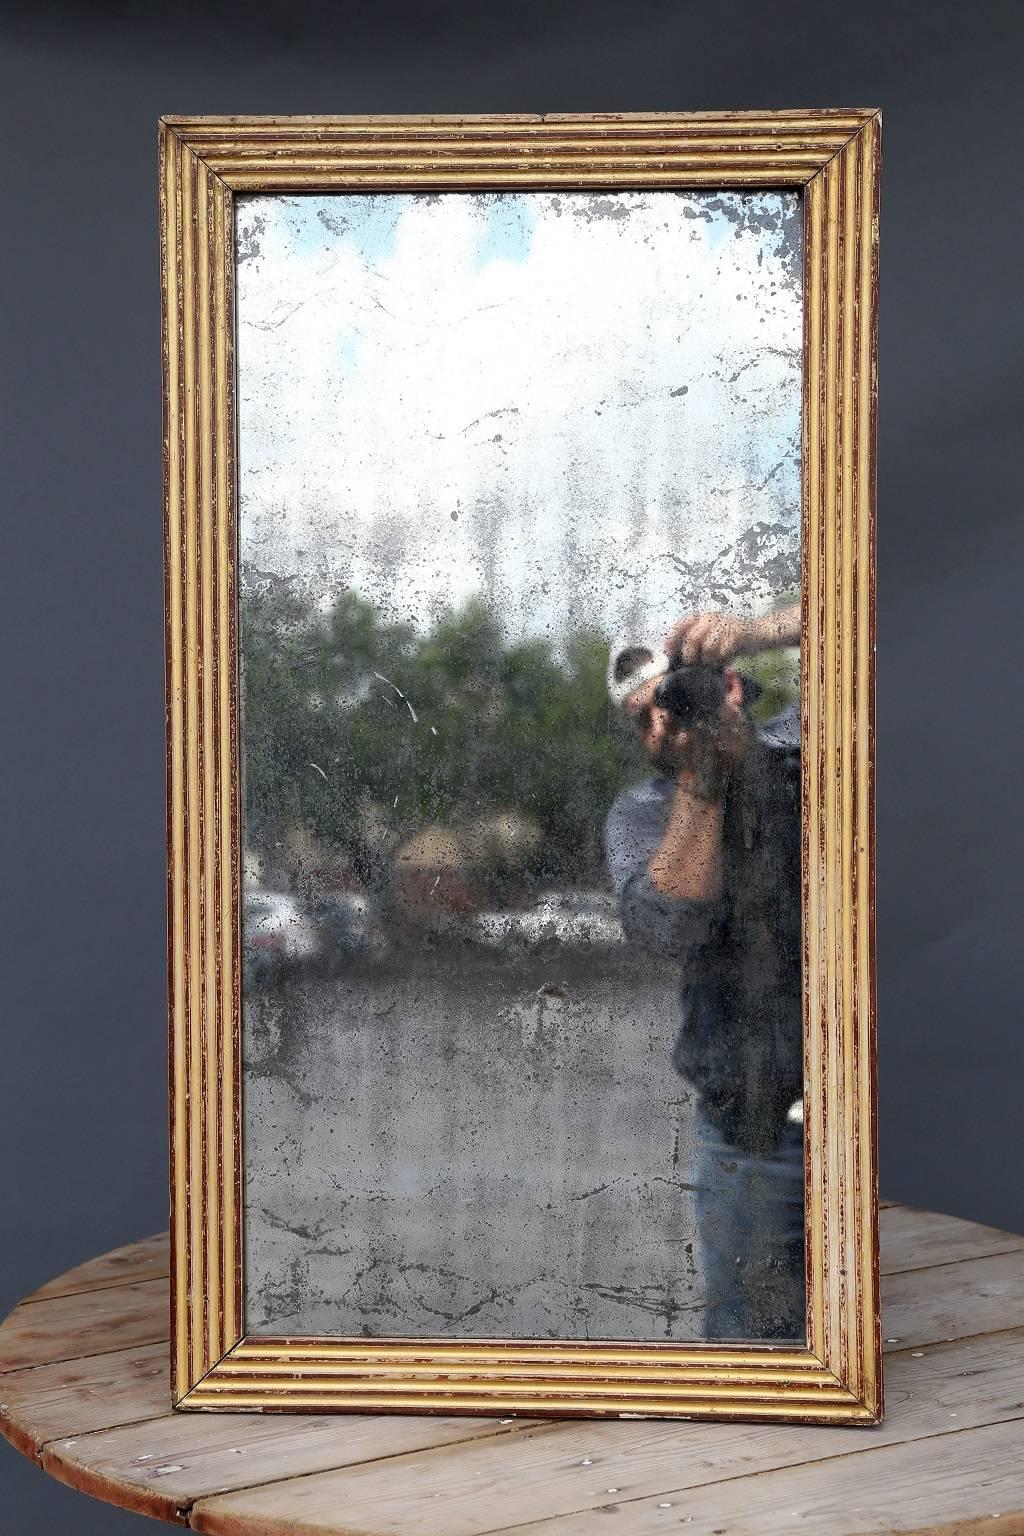 Late 18th century bois doré mirror, Classic fluted frame and original mirror with a moderate amount of spotting from age.